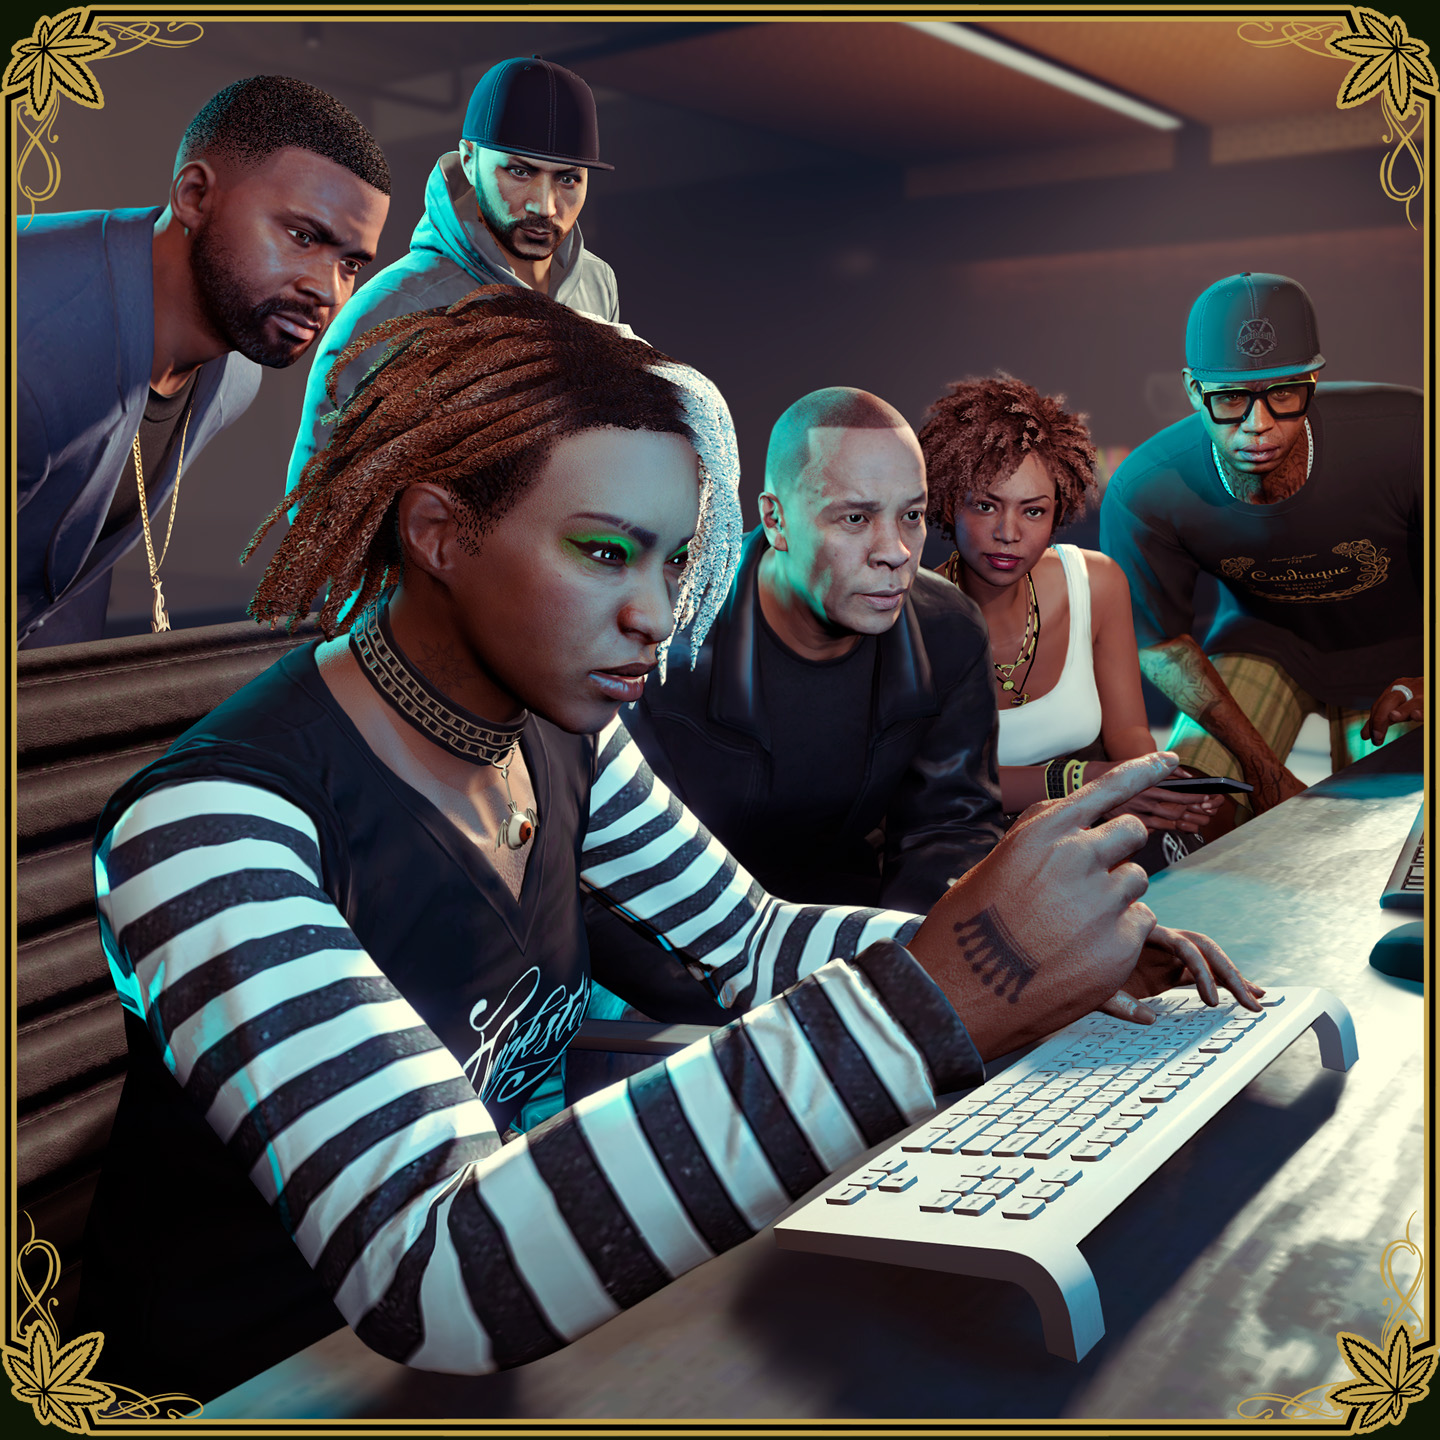 Introducing The Contract, a New GTA Online Story Featuring Franklin Clinton  and Friends - Xbox Wire